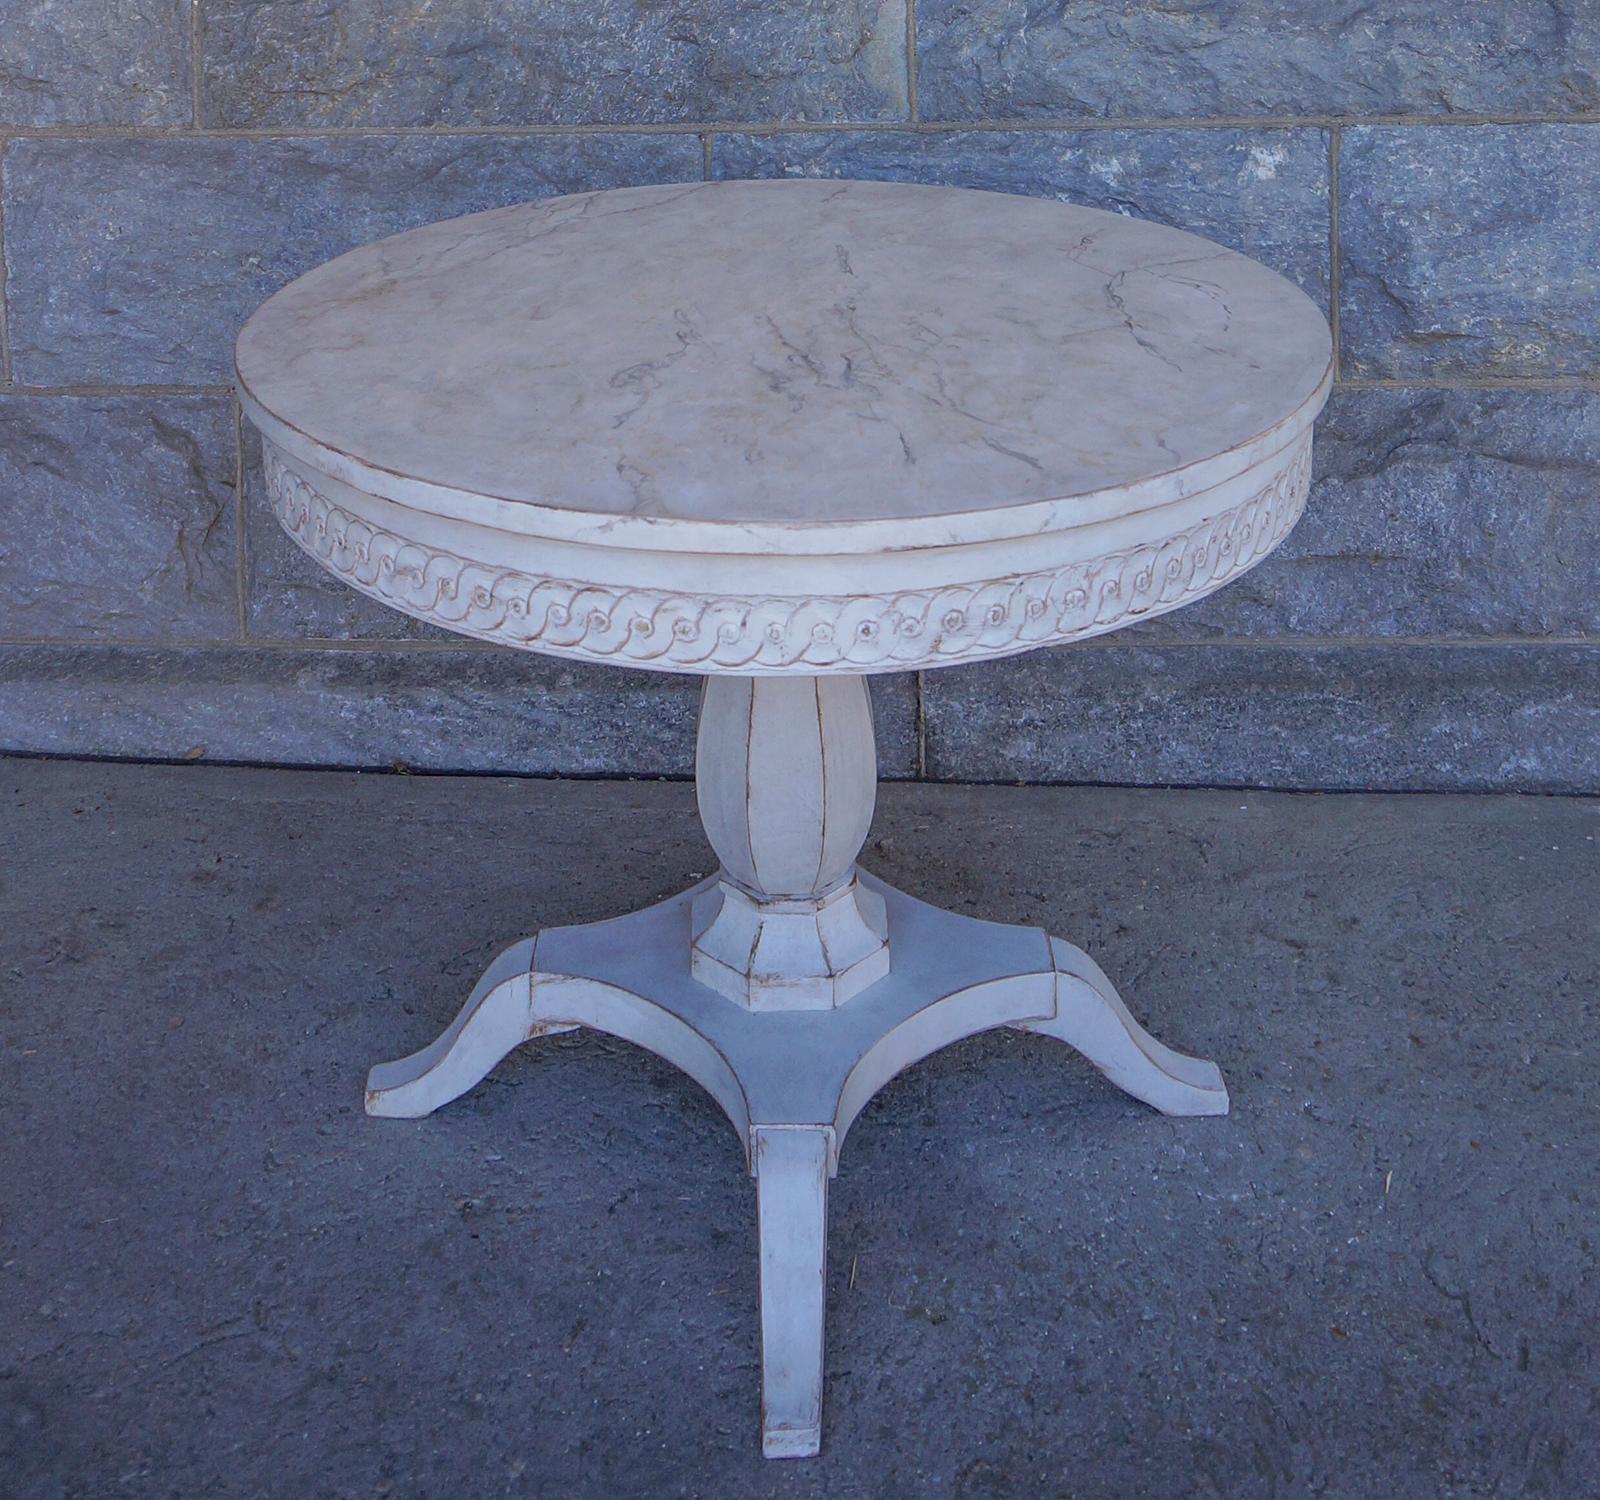 Period Empire center table, Sweden, circa 1840, with a circular top having guilloche carving around the apron. Faceted pedestal with bulbous form on a platform base with four curved feet.